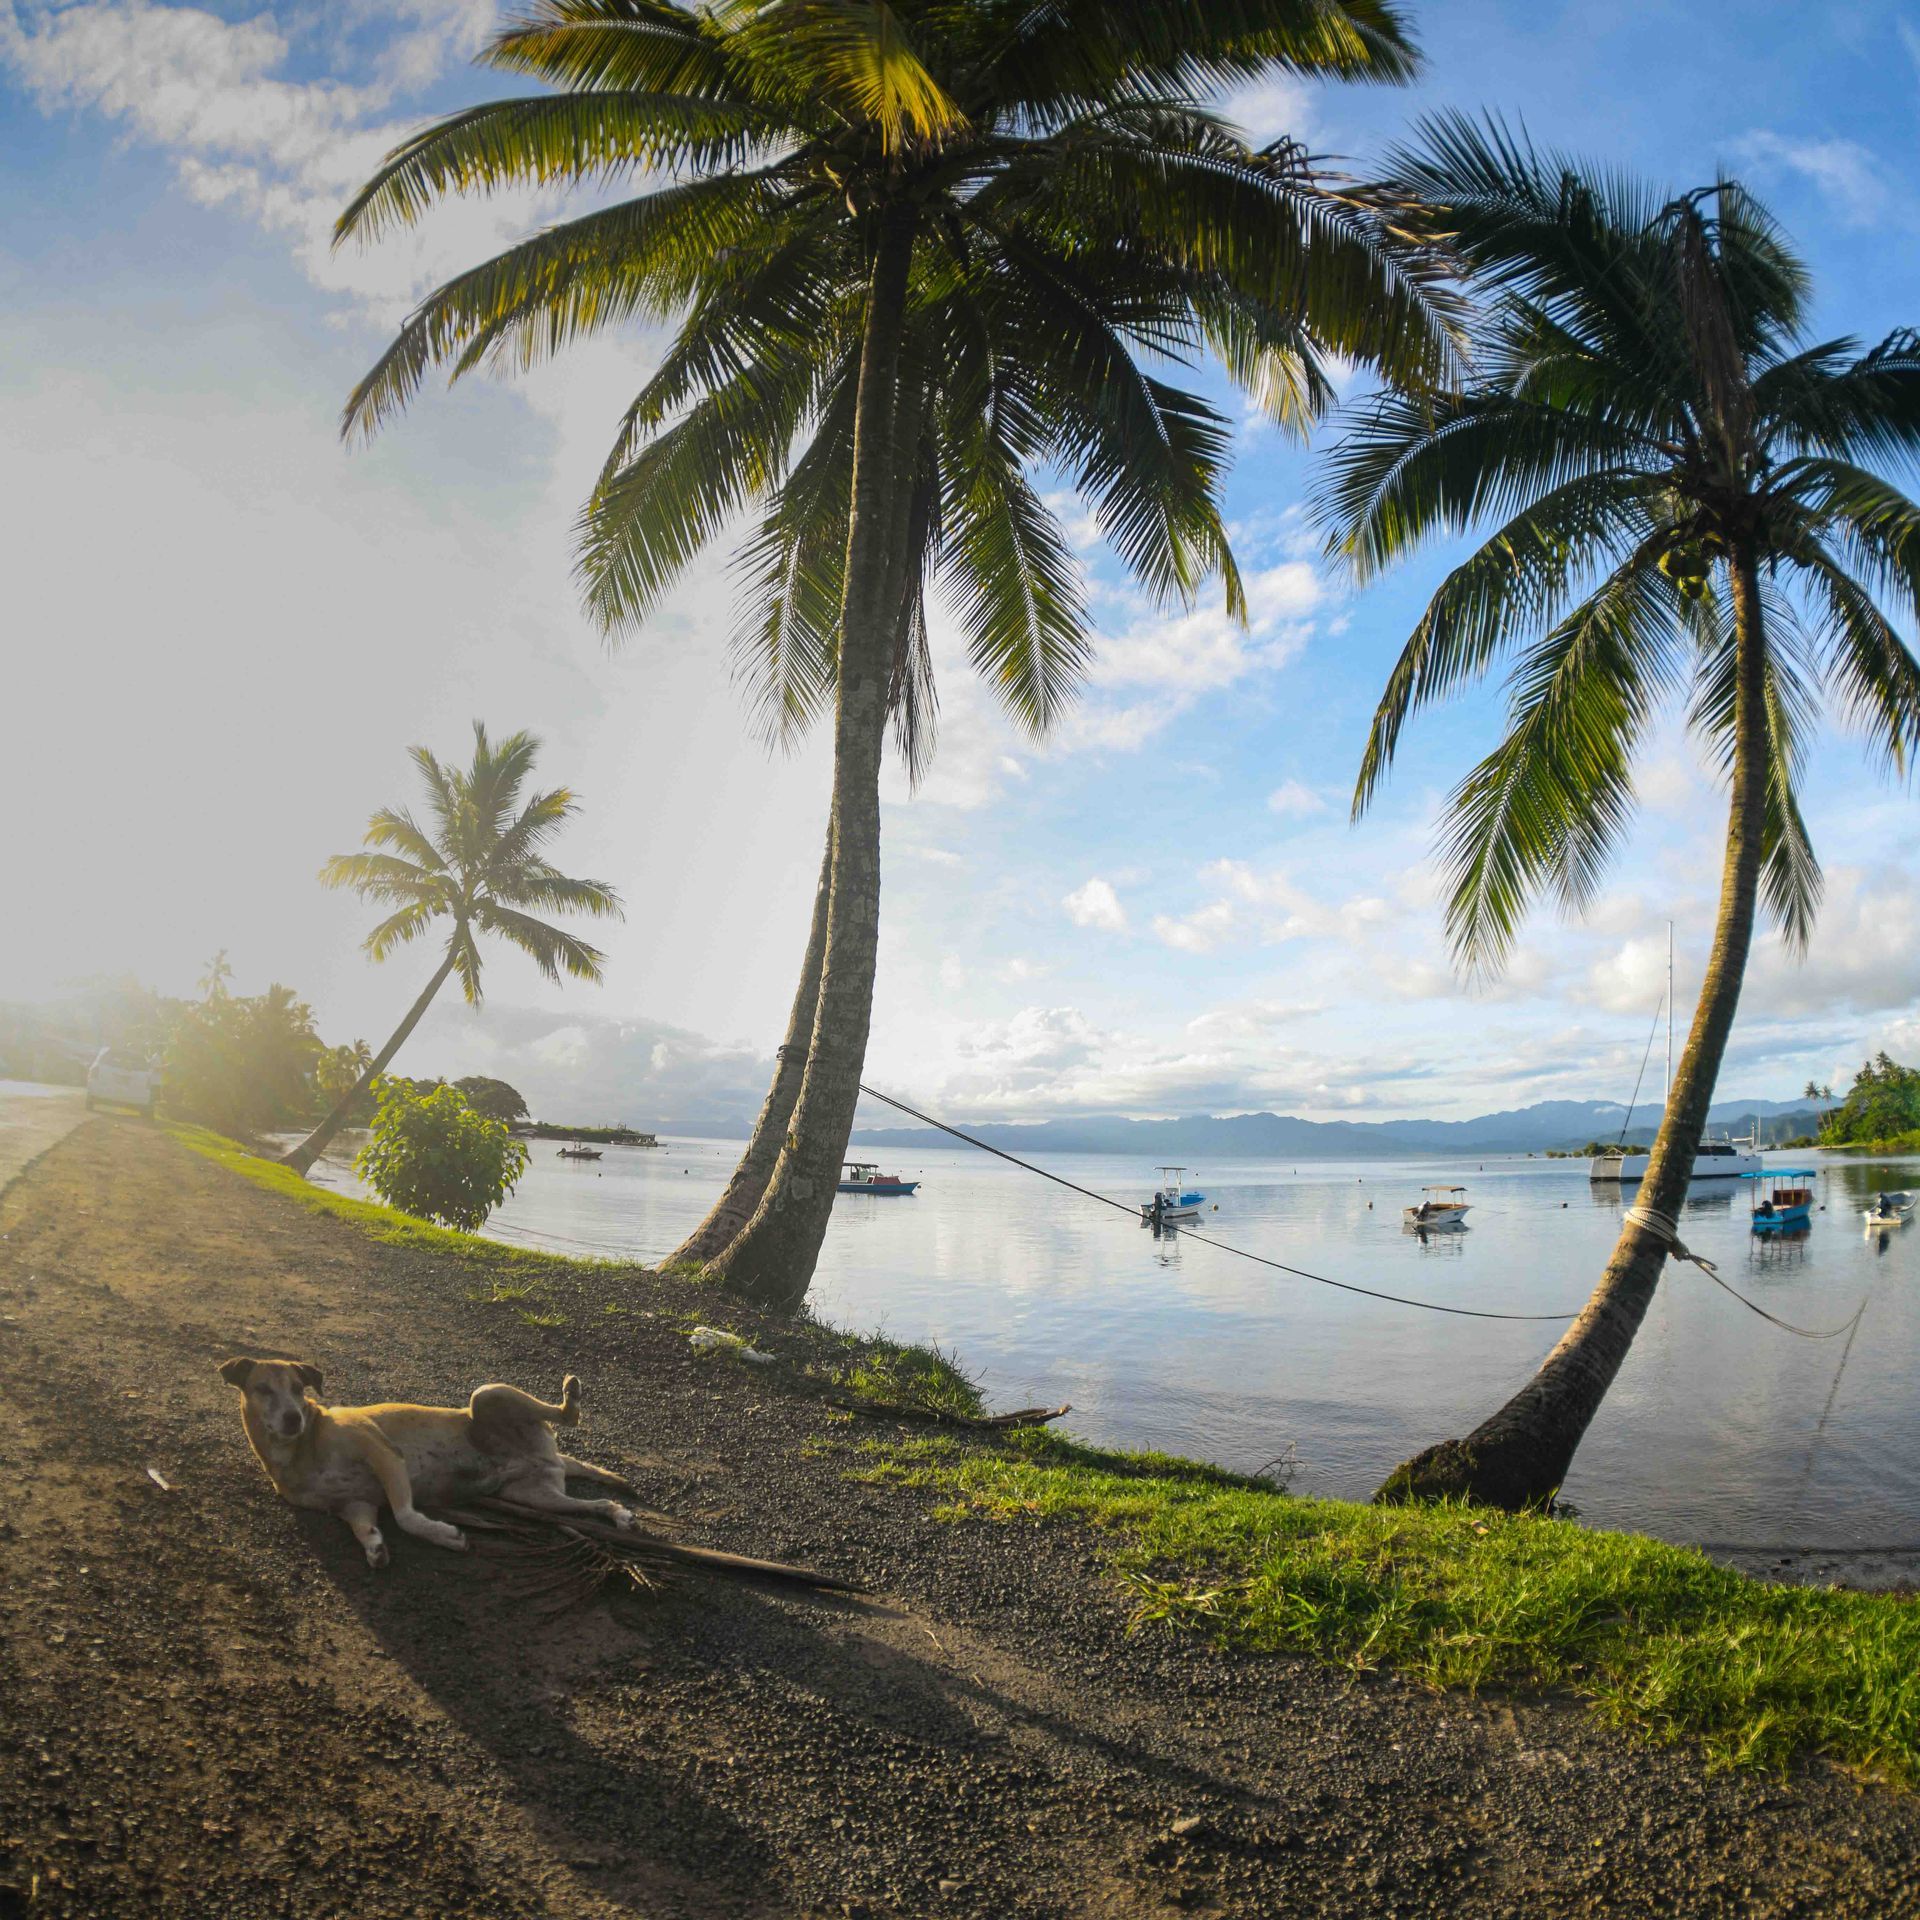 Coconut trees and small boats line the mainroad in Savusavu town Fiji 